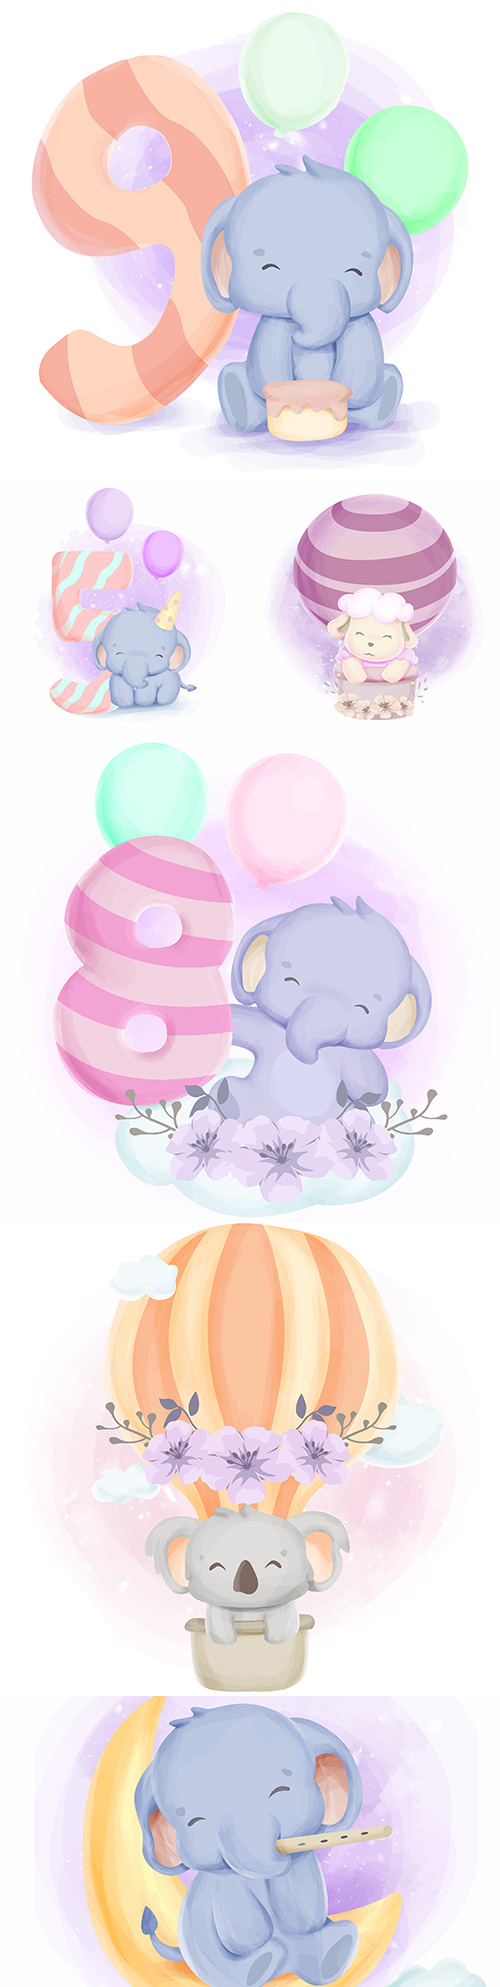 Cute elephant with balls and numbers watercolor illustration
